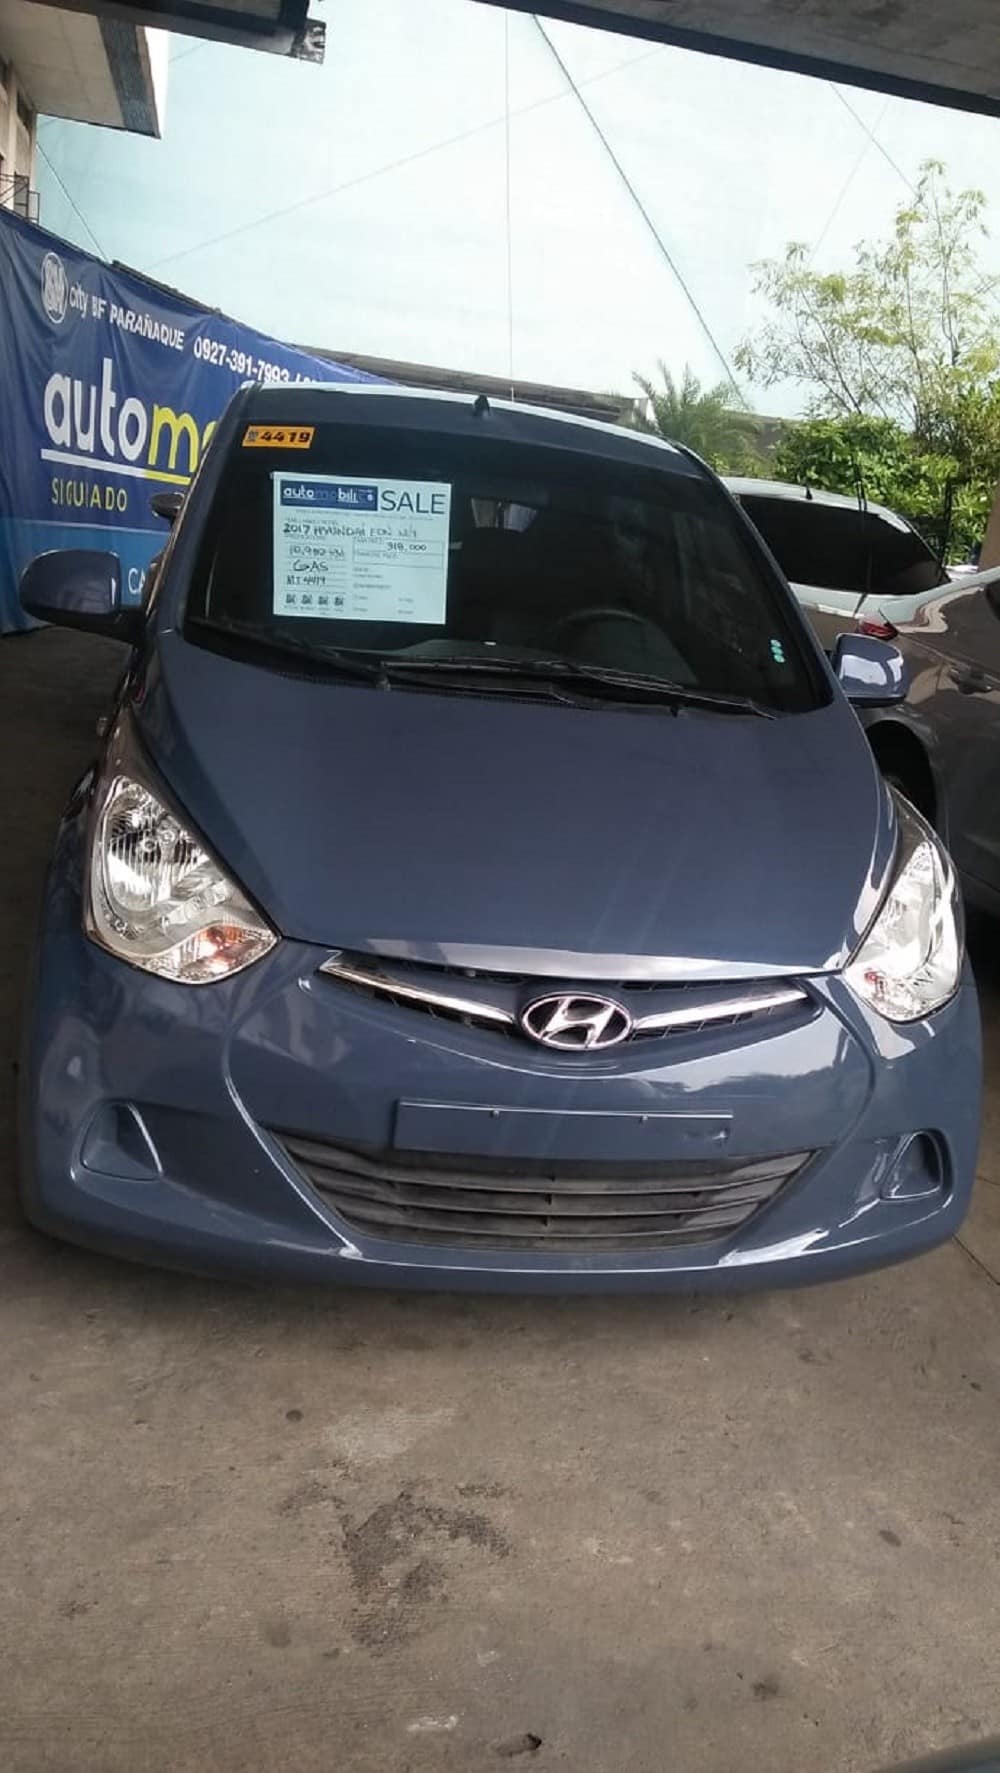 Hyundai Eon Parts And Accessories Cheap Sale - www.puzzlewood.net 1694785850